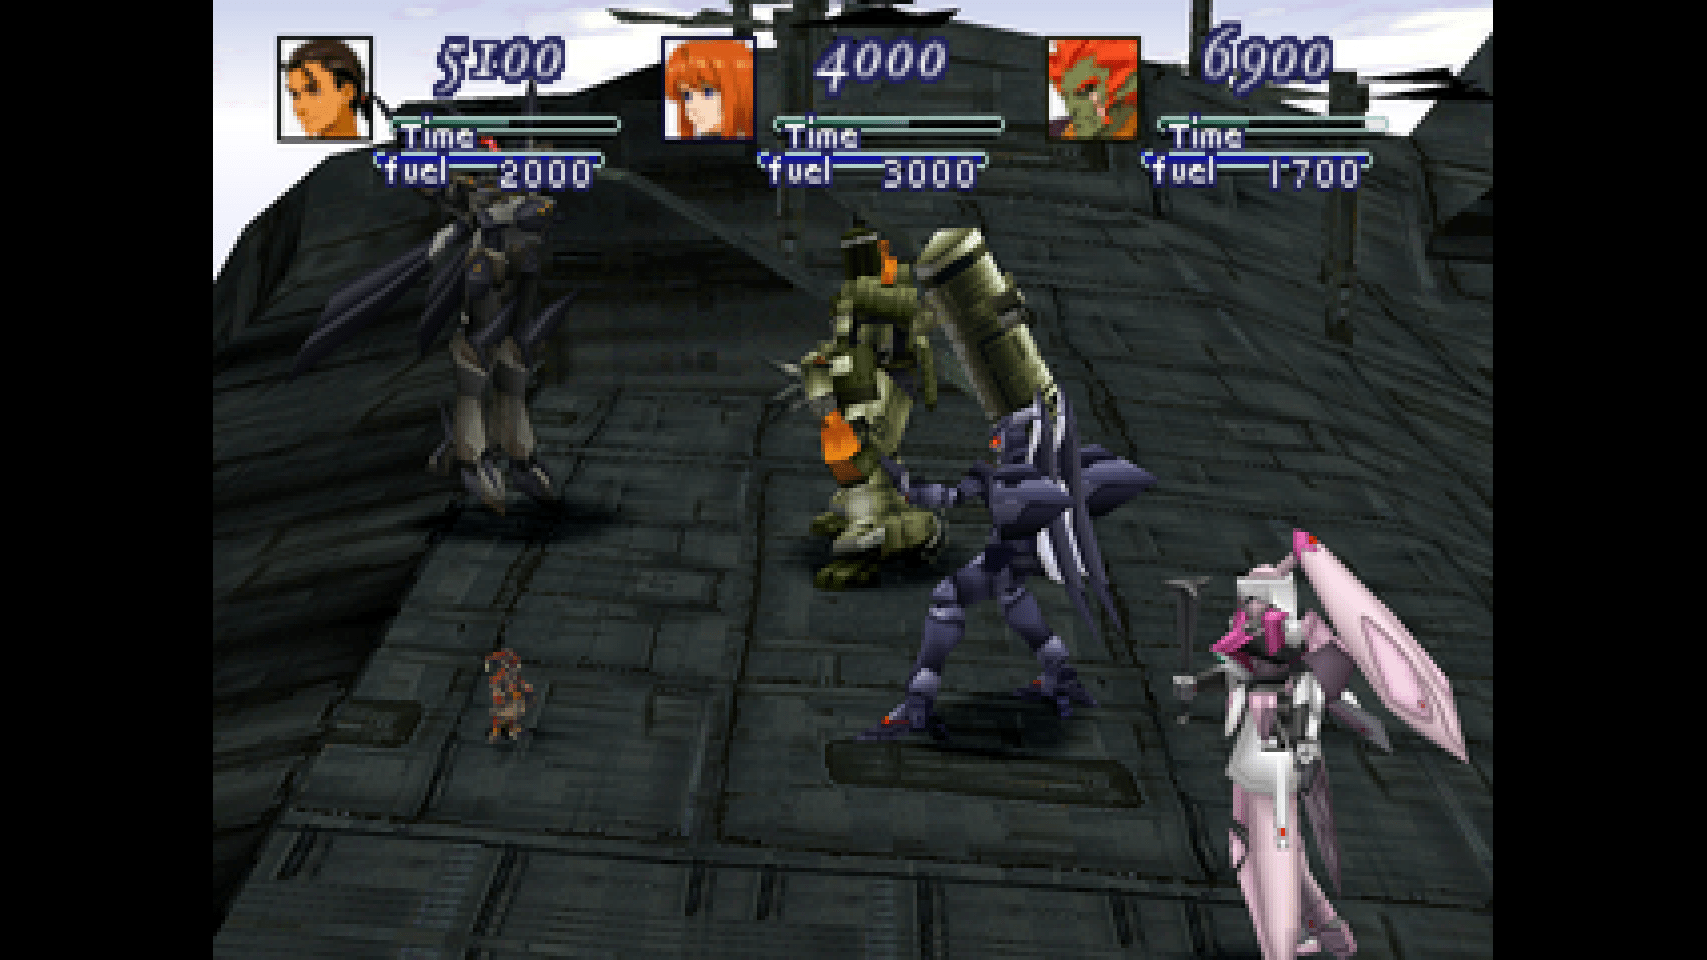 Xenogears for the PlayStation. (Screenshot: Square Enix / MobyGames)